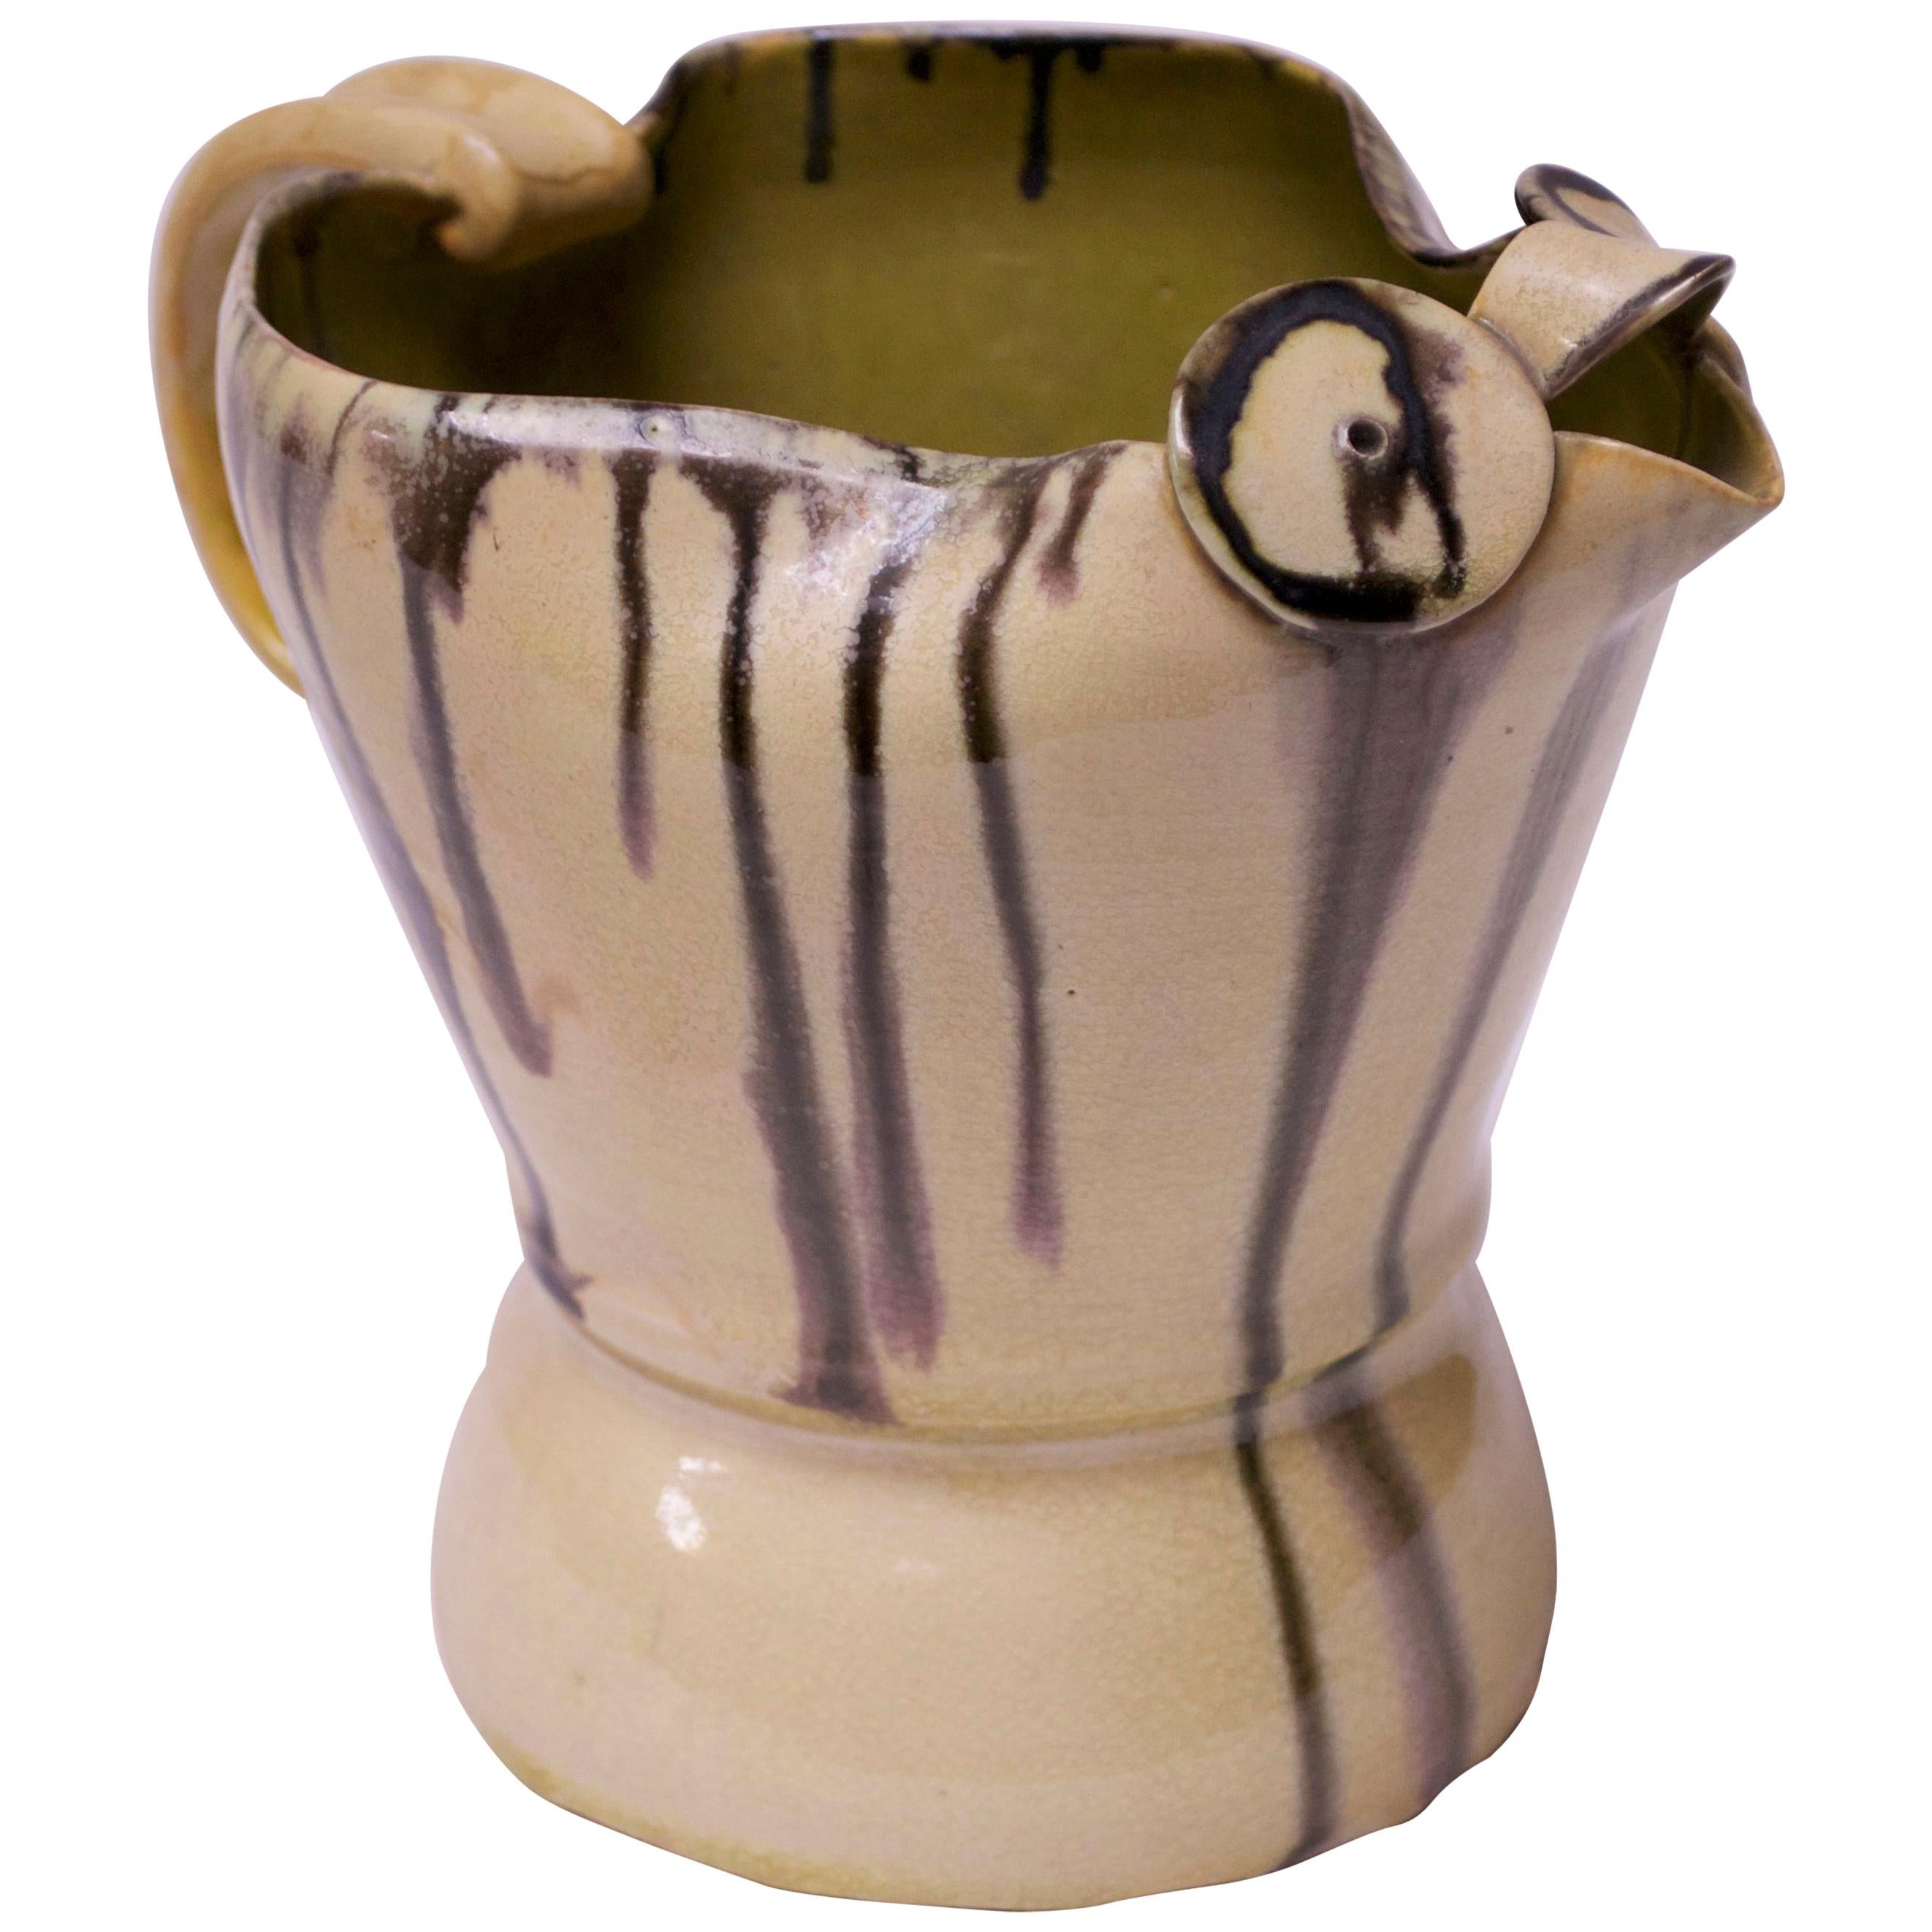 1940s Studio Pottery Chicken Pitcher by Emily Reinse